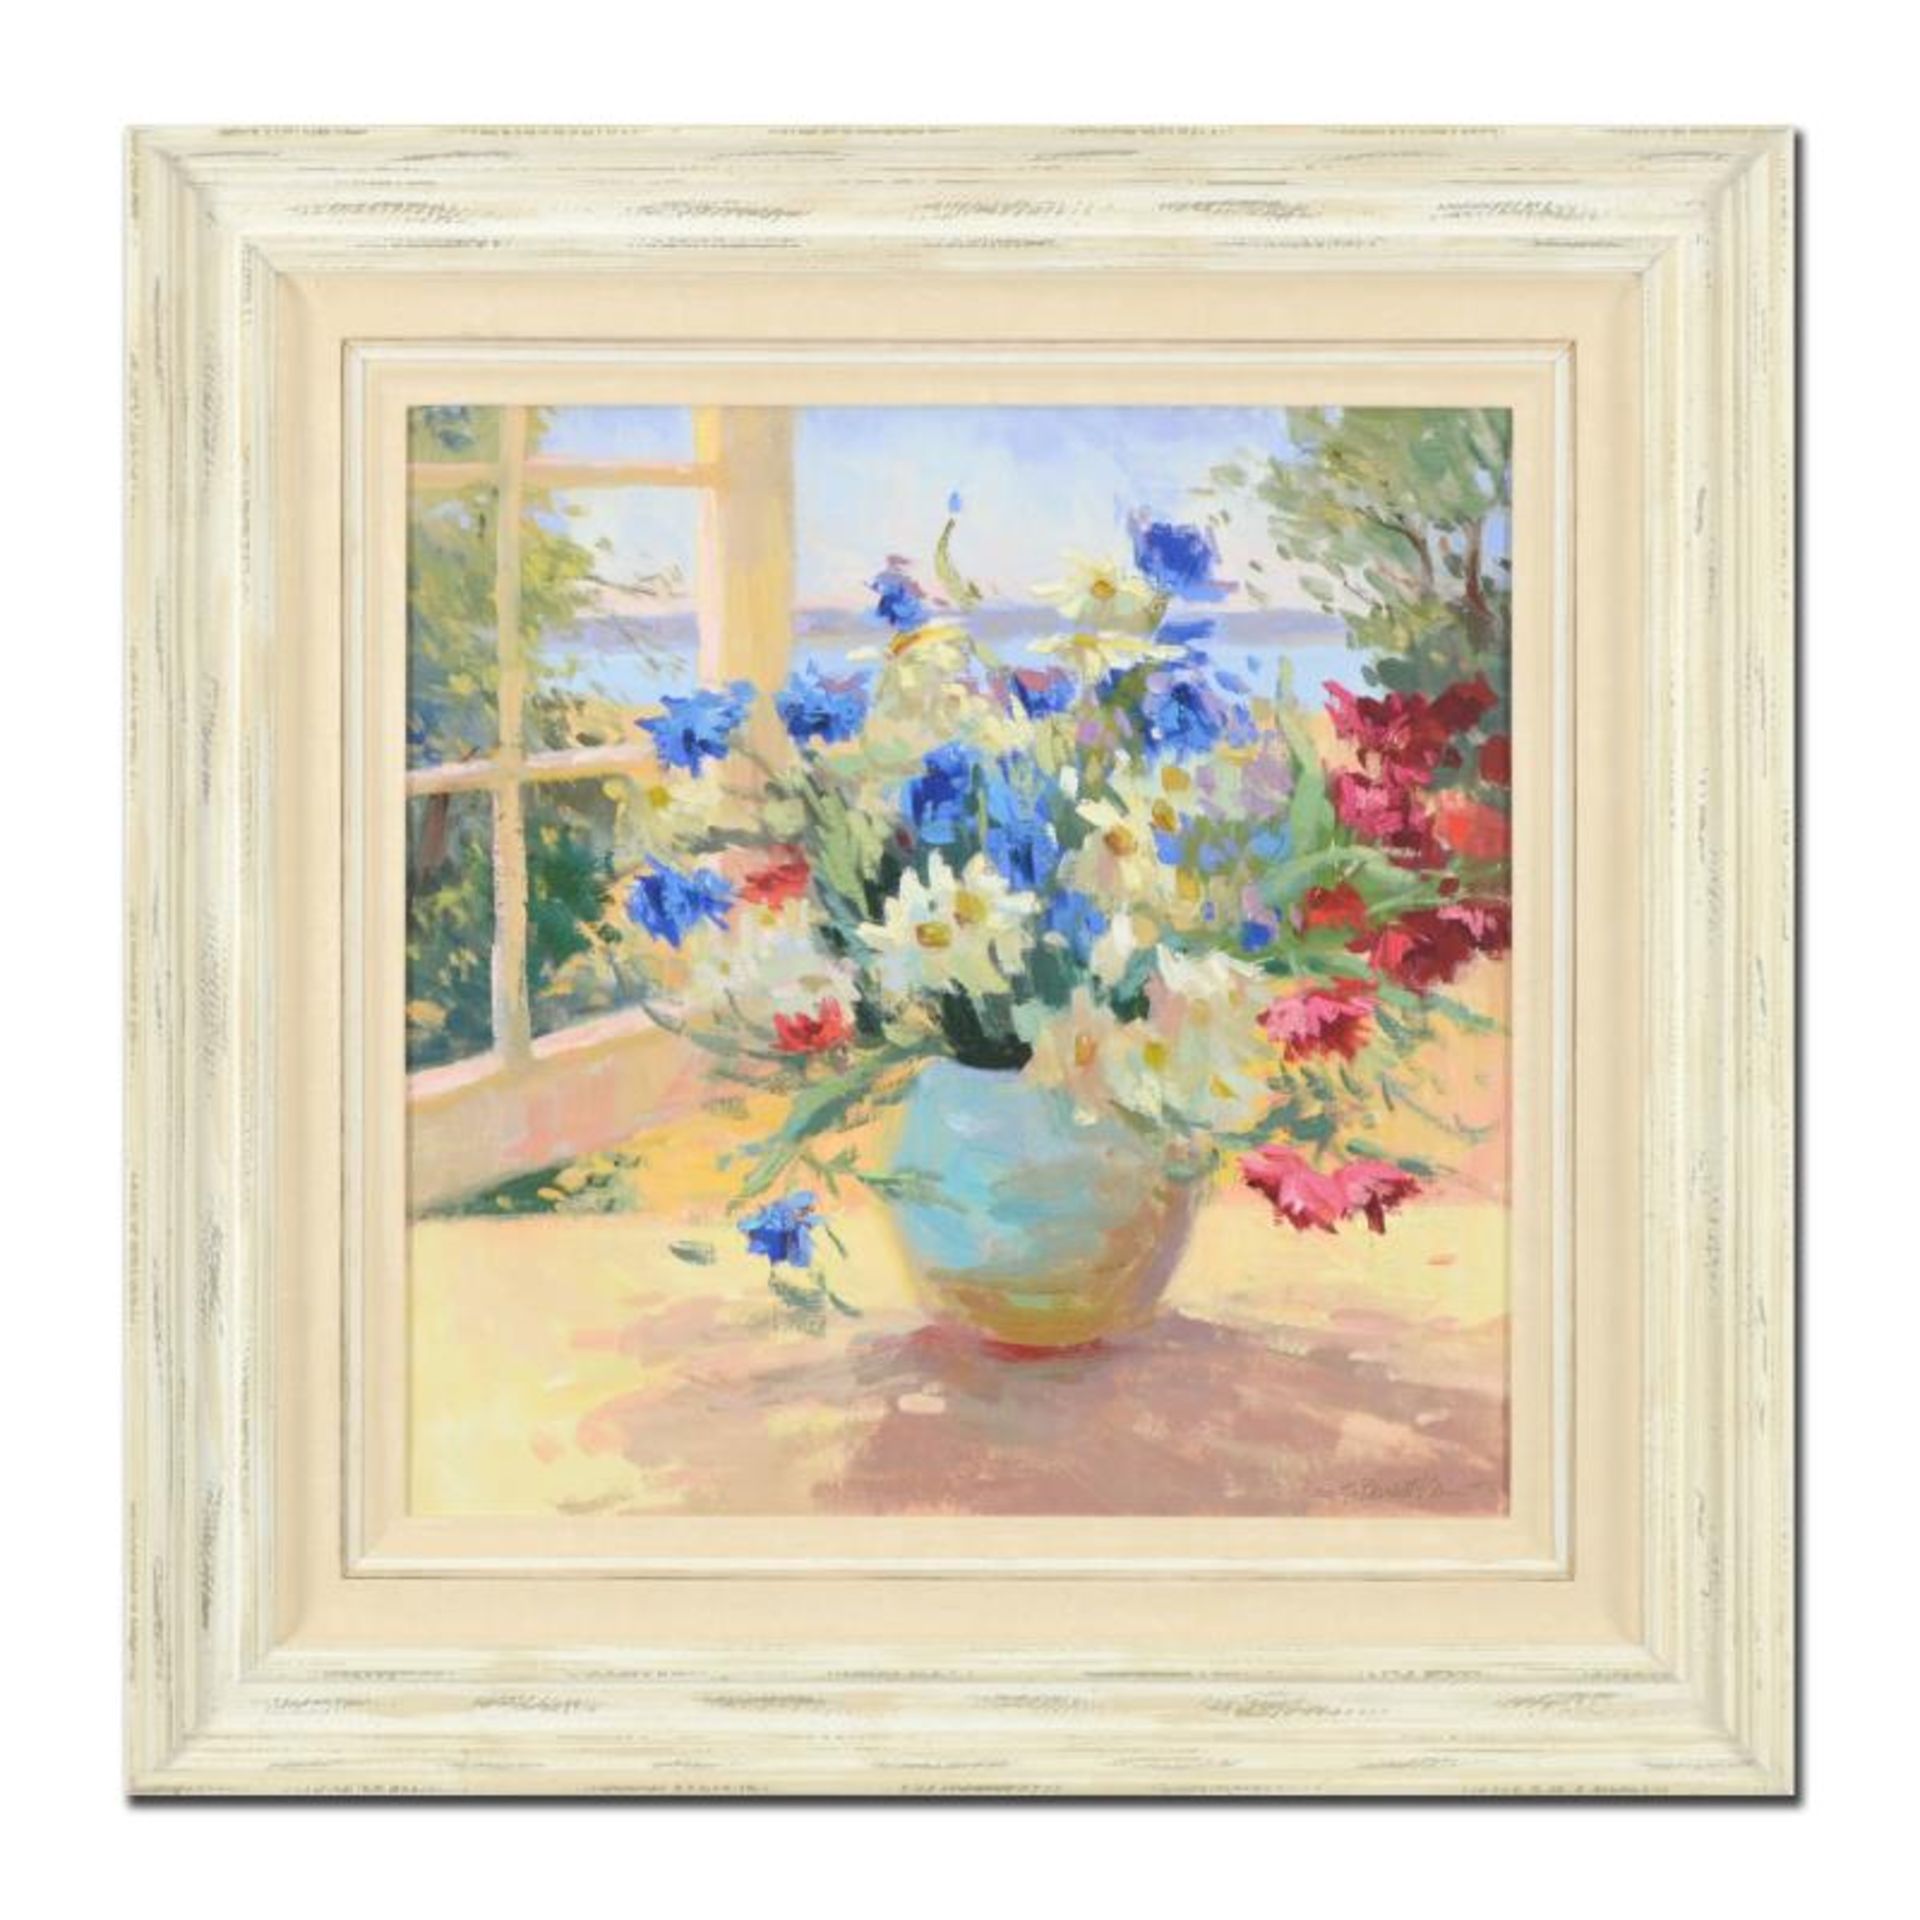 S. Burkett Kaiser, "Daisies & Pansies" Framed Limited Edition on Canvas, AP Numb